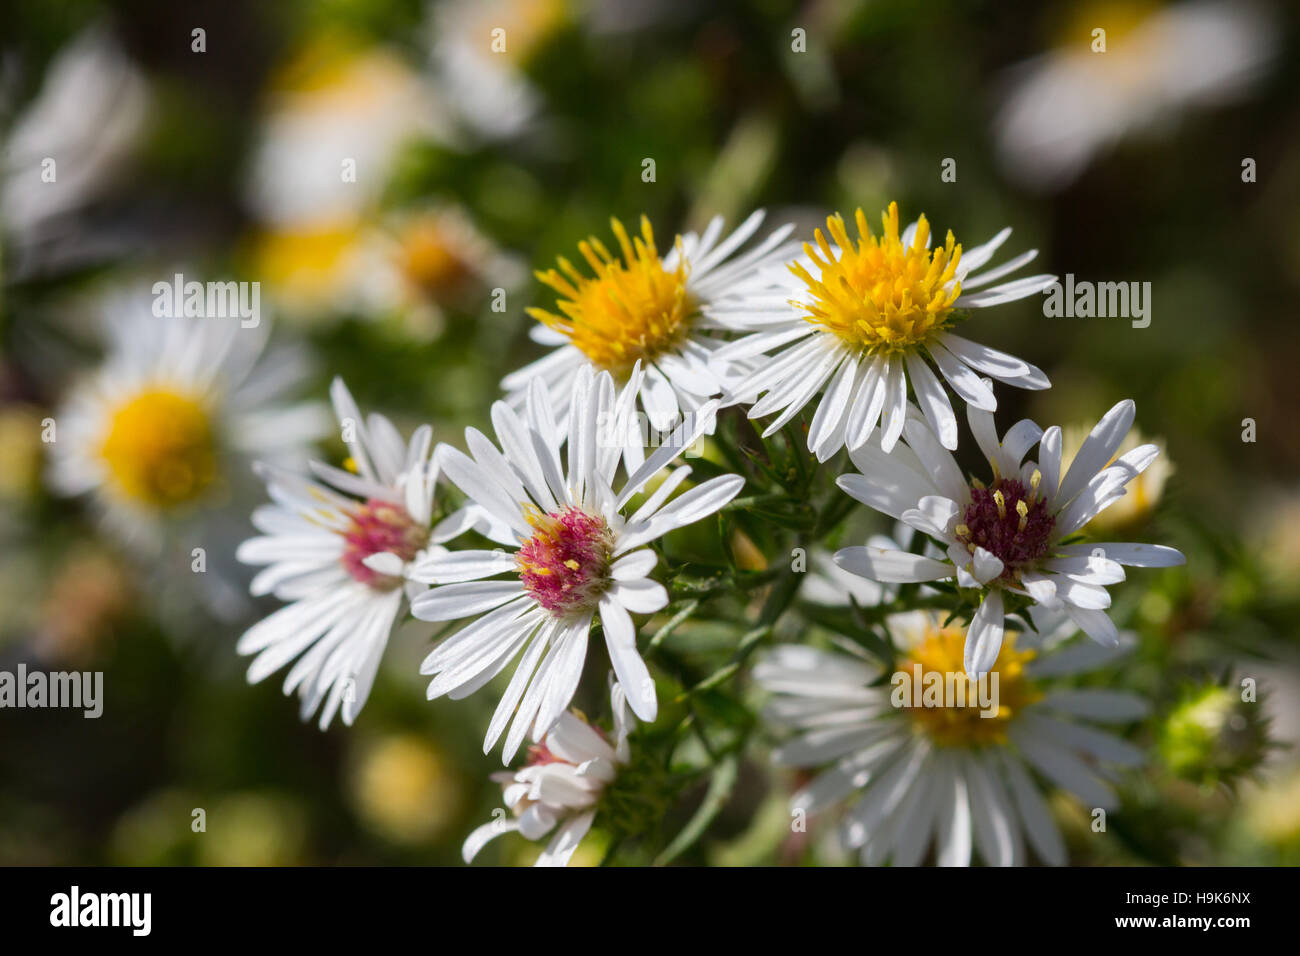 White heath aster flowers (Symphyotrichum ericoides) blooming in a field, Indiana, United States Stock Photo